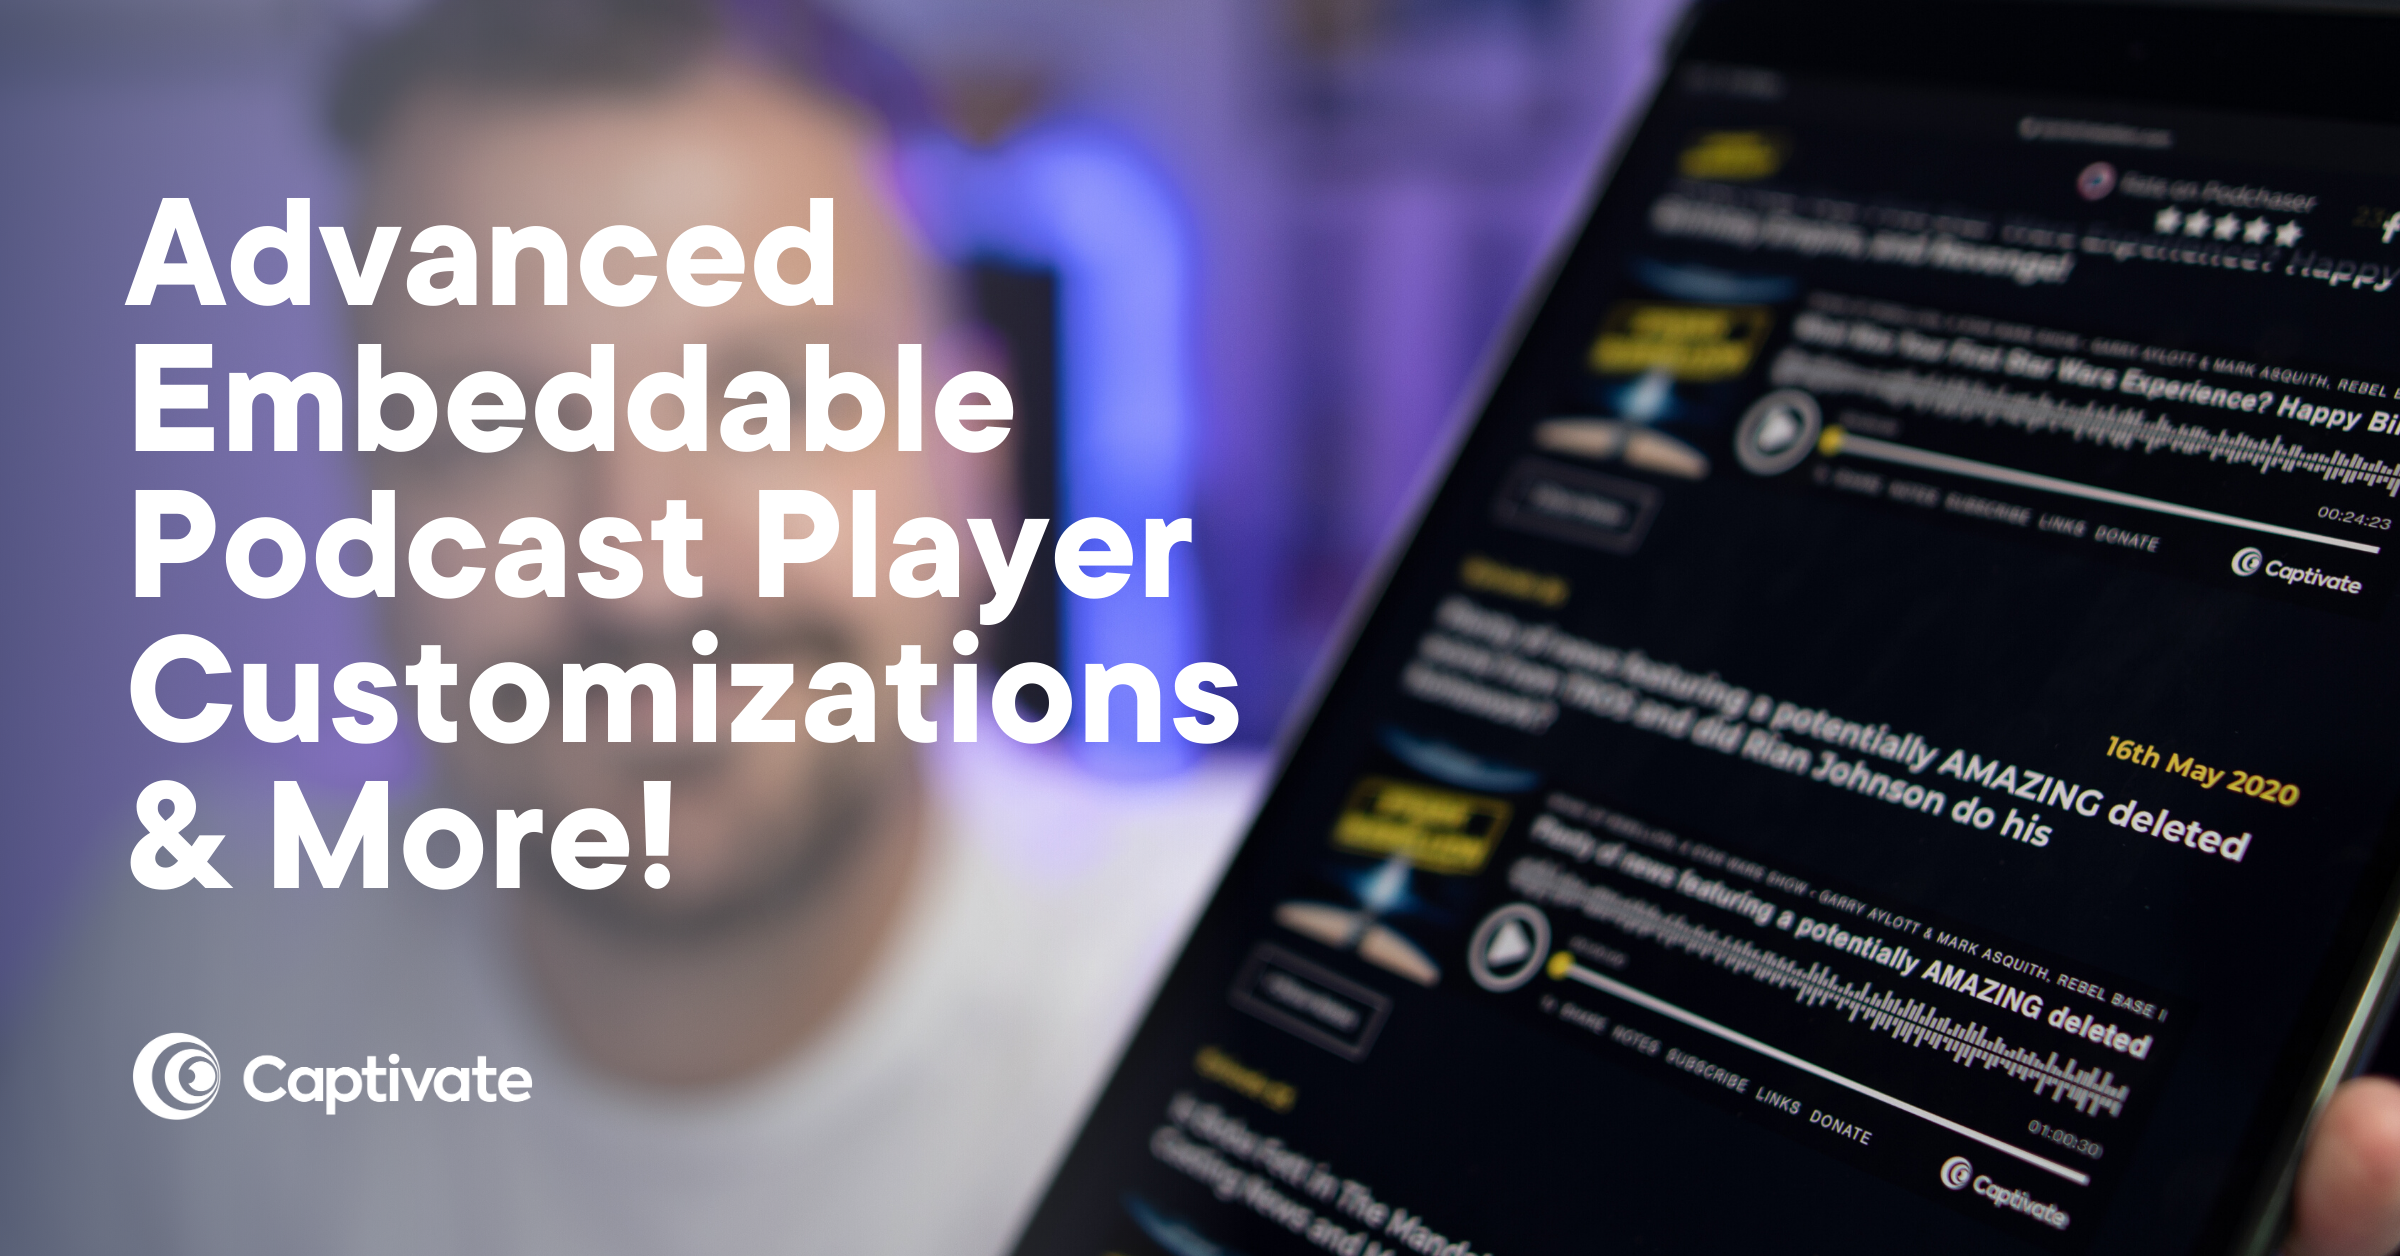 Advanced Embeddable Podcast Player Customizations & More!